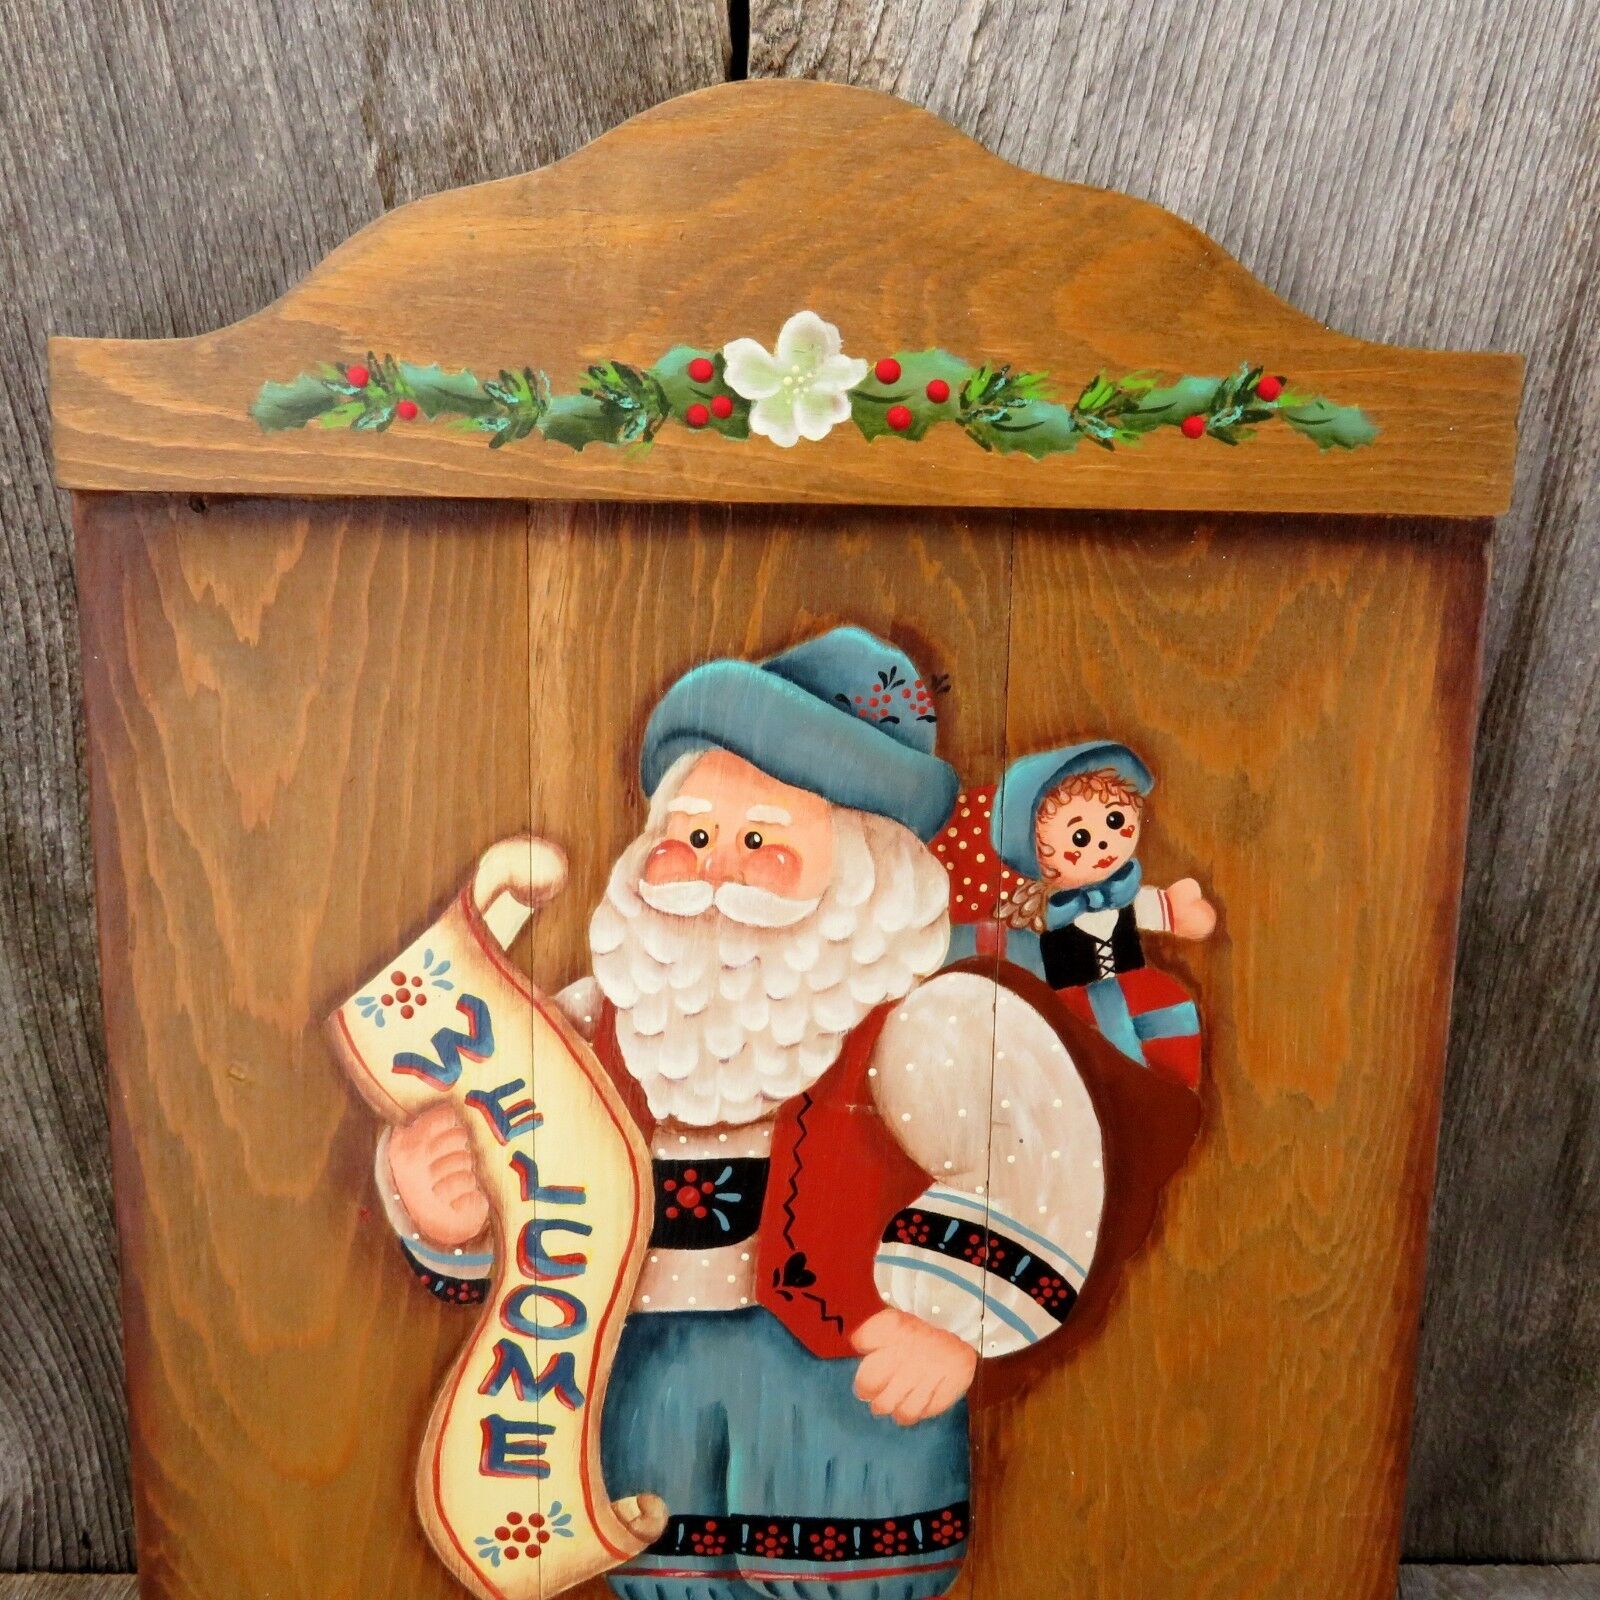 Vintage Wood Welcome Sign Santa Christmas Old World Tole Painted Decoration - At Grandma's Table